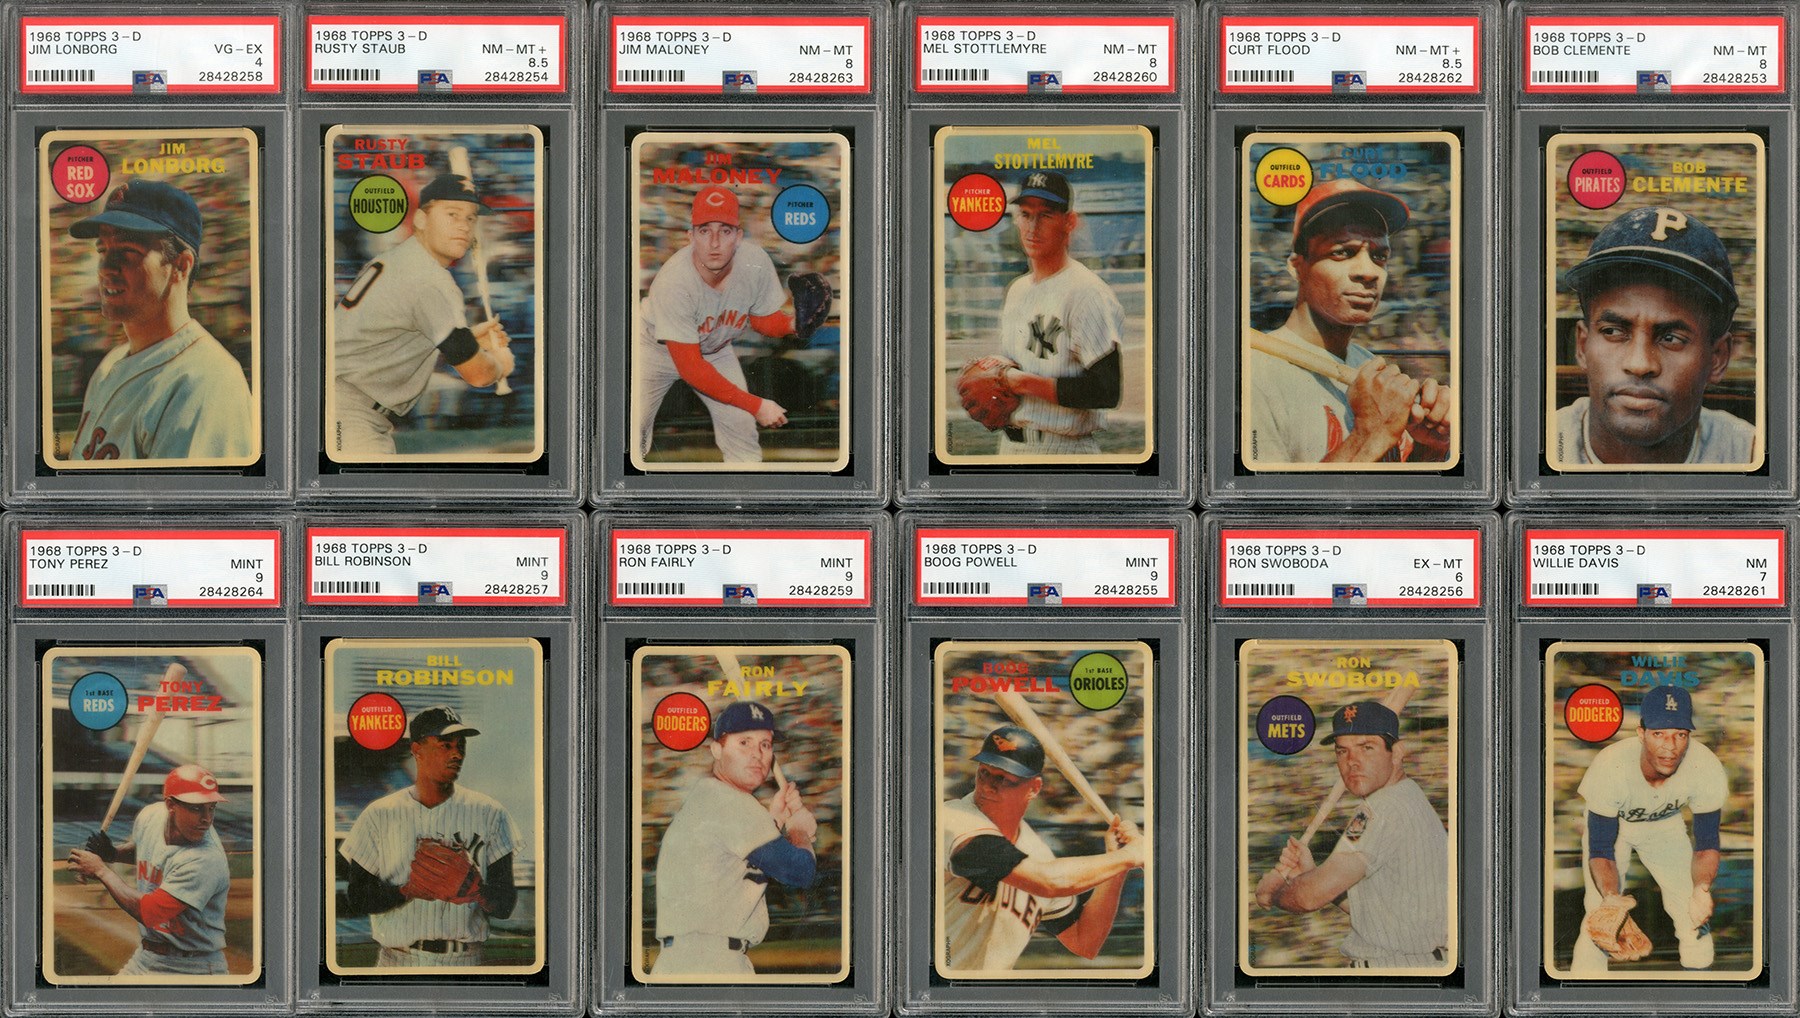 Baseball and Trading Cards - 1968 Topps 3-D PSA Graded Complete Set of 12 cards with PSA 8 Clemente! - #5 All Time Finest Registry Set